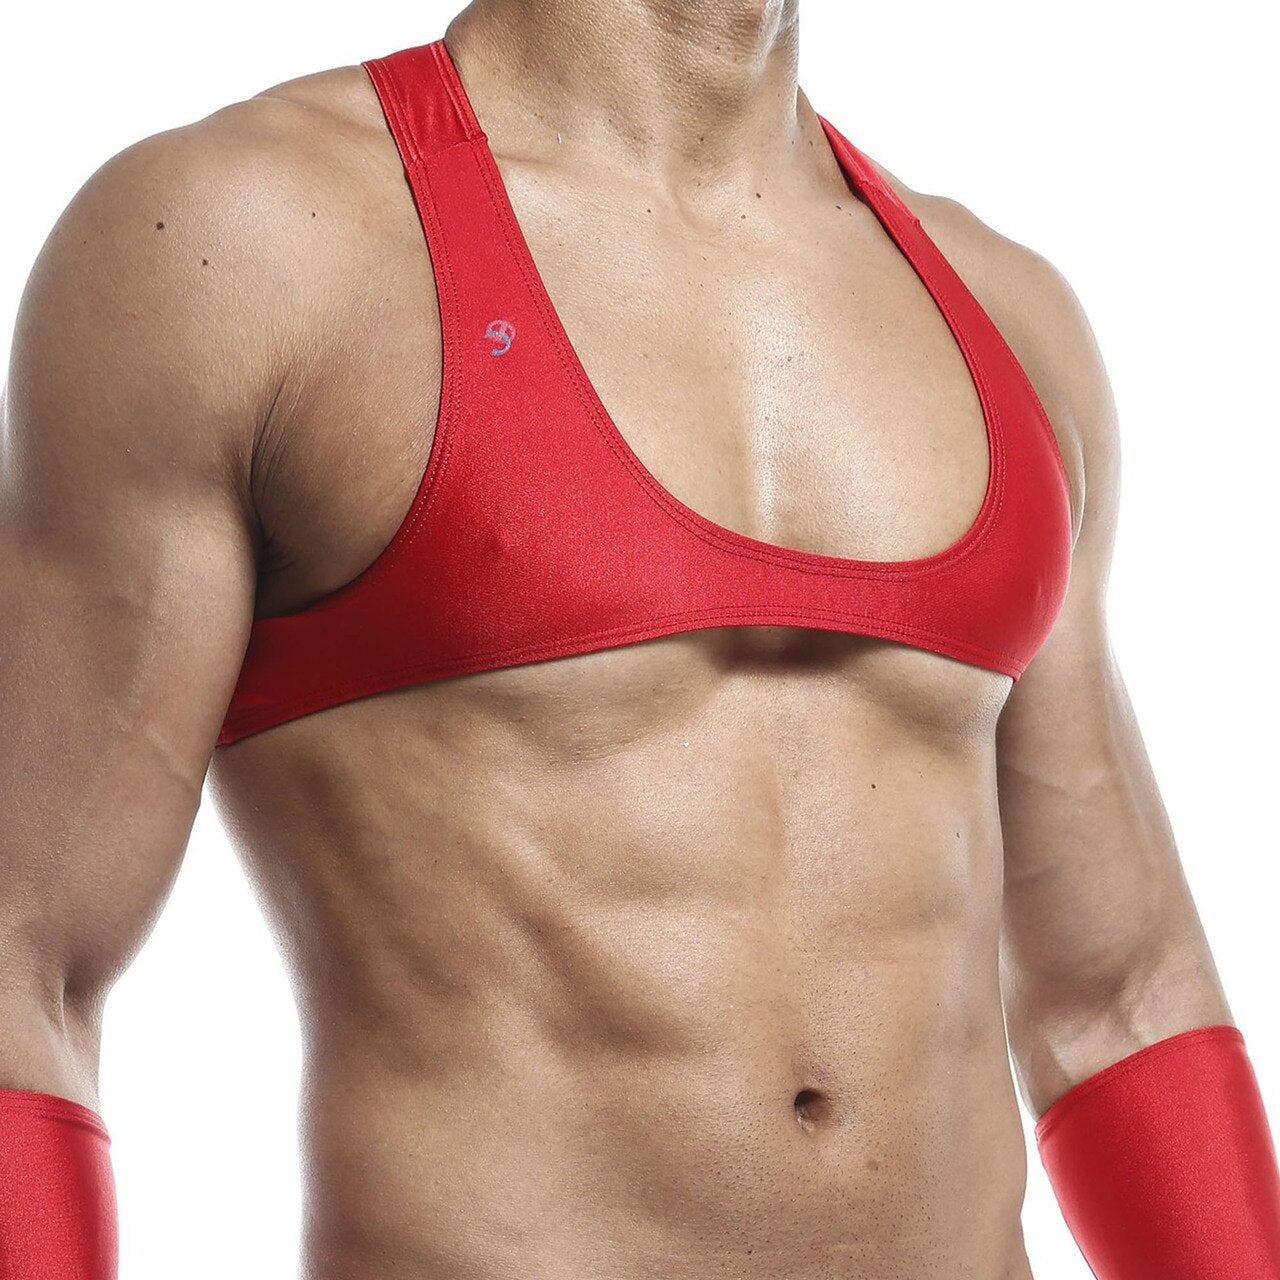 JCSTK - Mens Joe Snyder Stretch Spandex Posing Top with Y Back Red